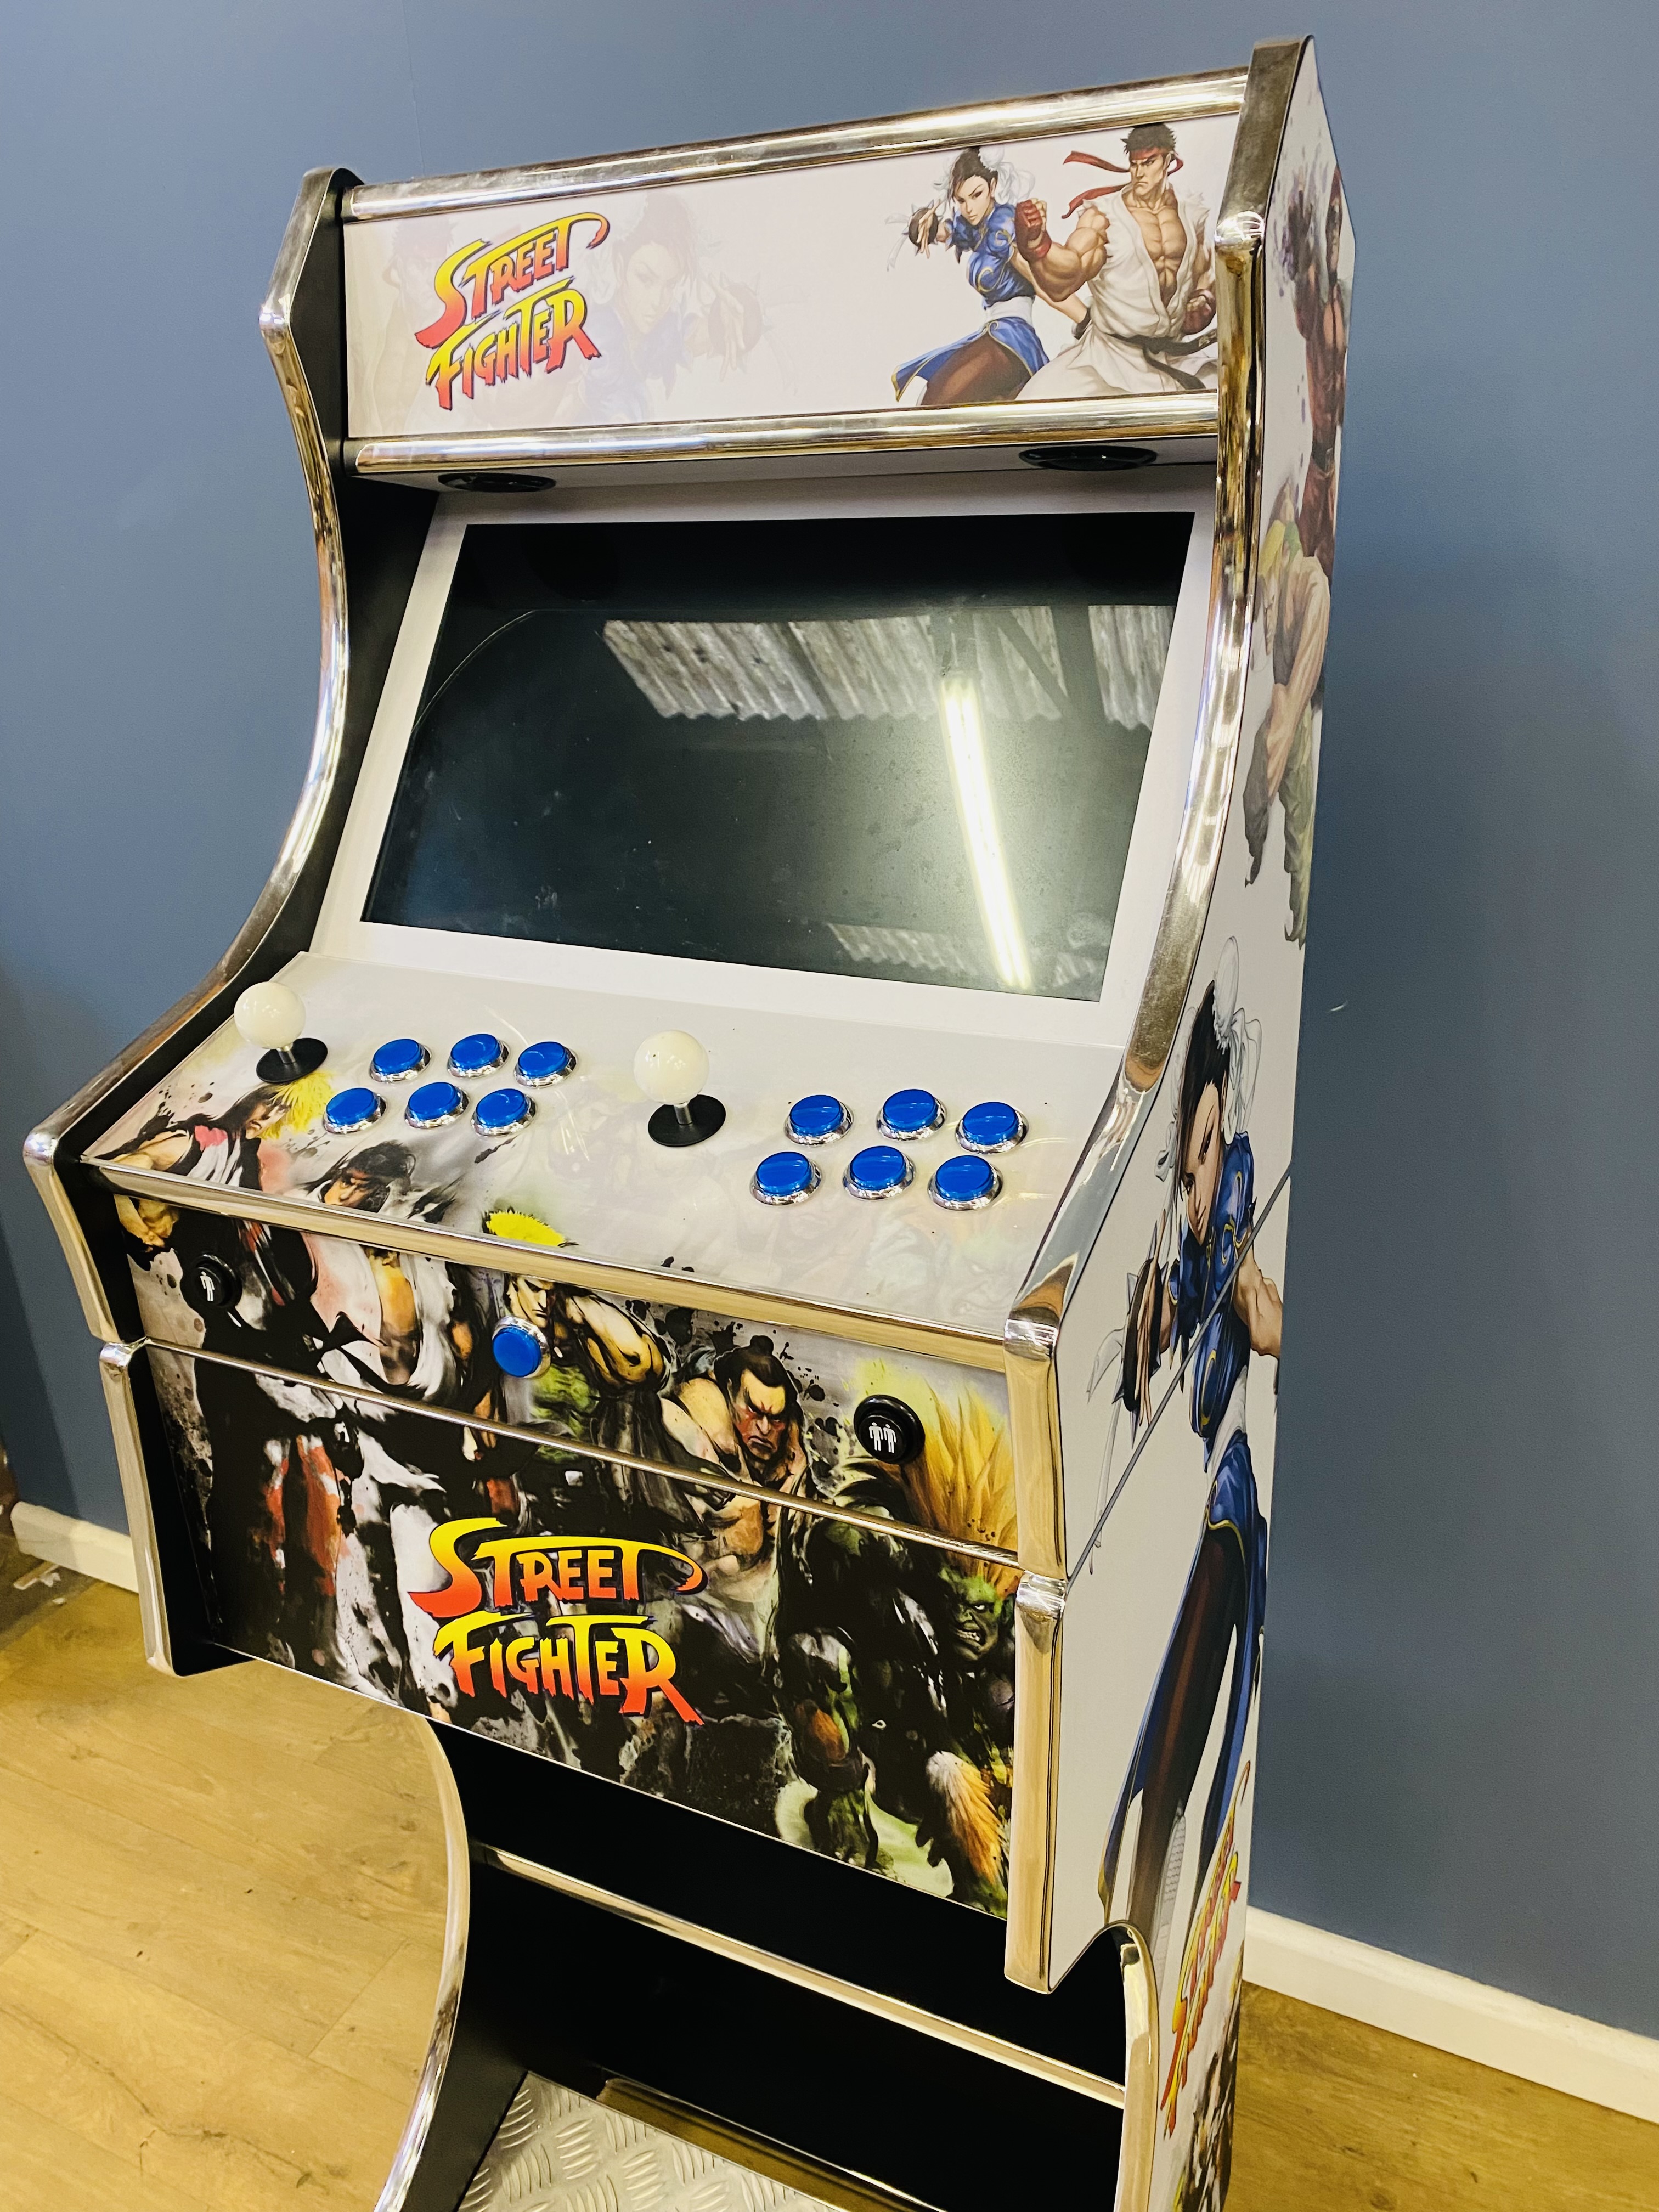 Arcade Mania Street Fighter, arcade style game with pre-loaded games - Image 3 of 3